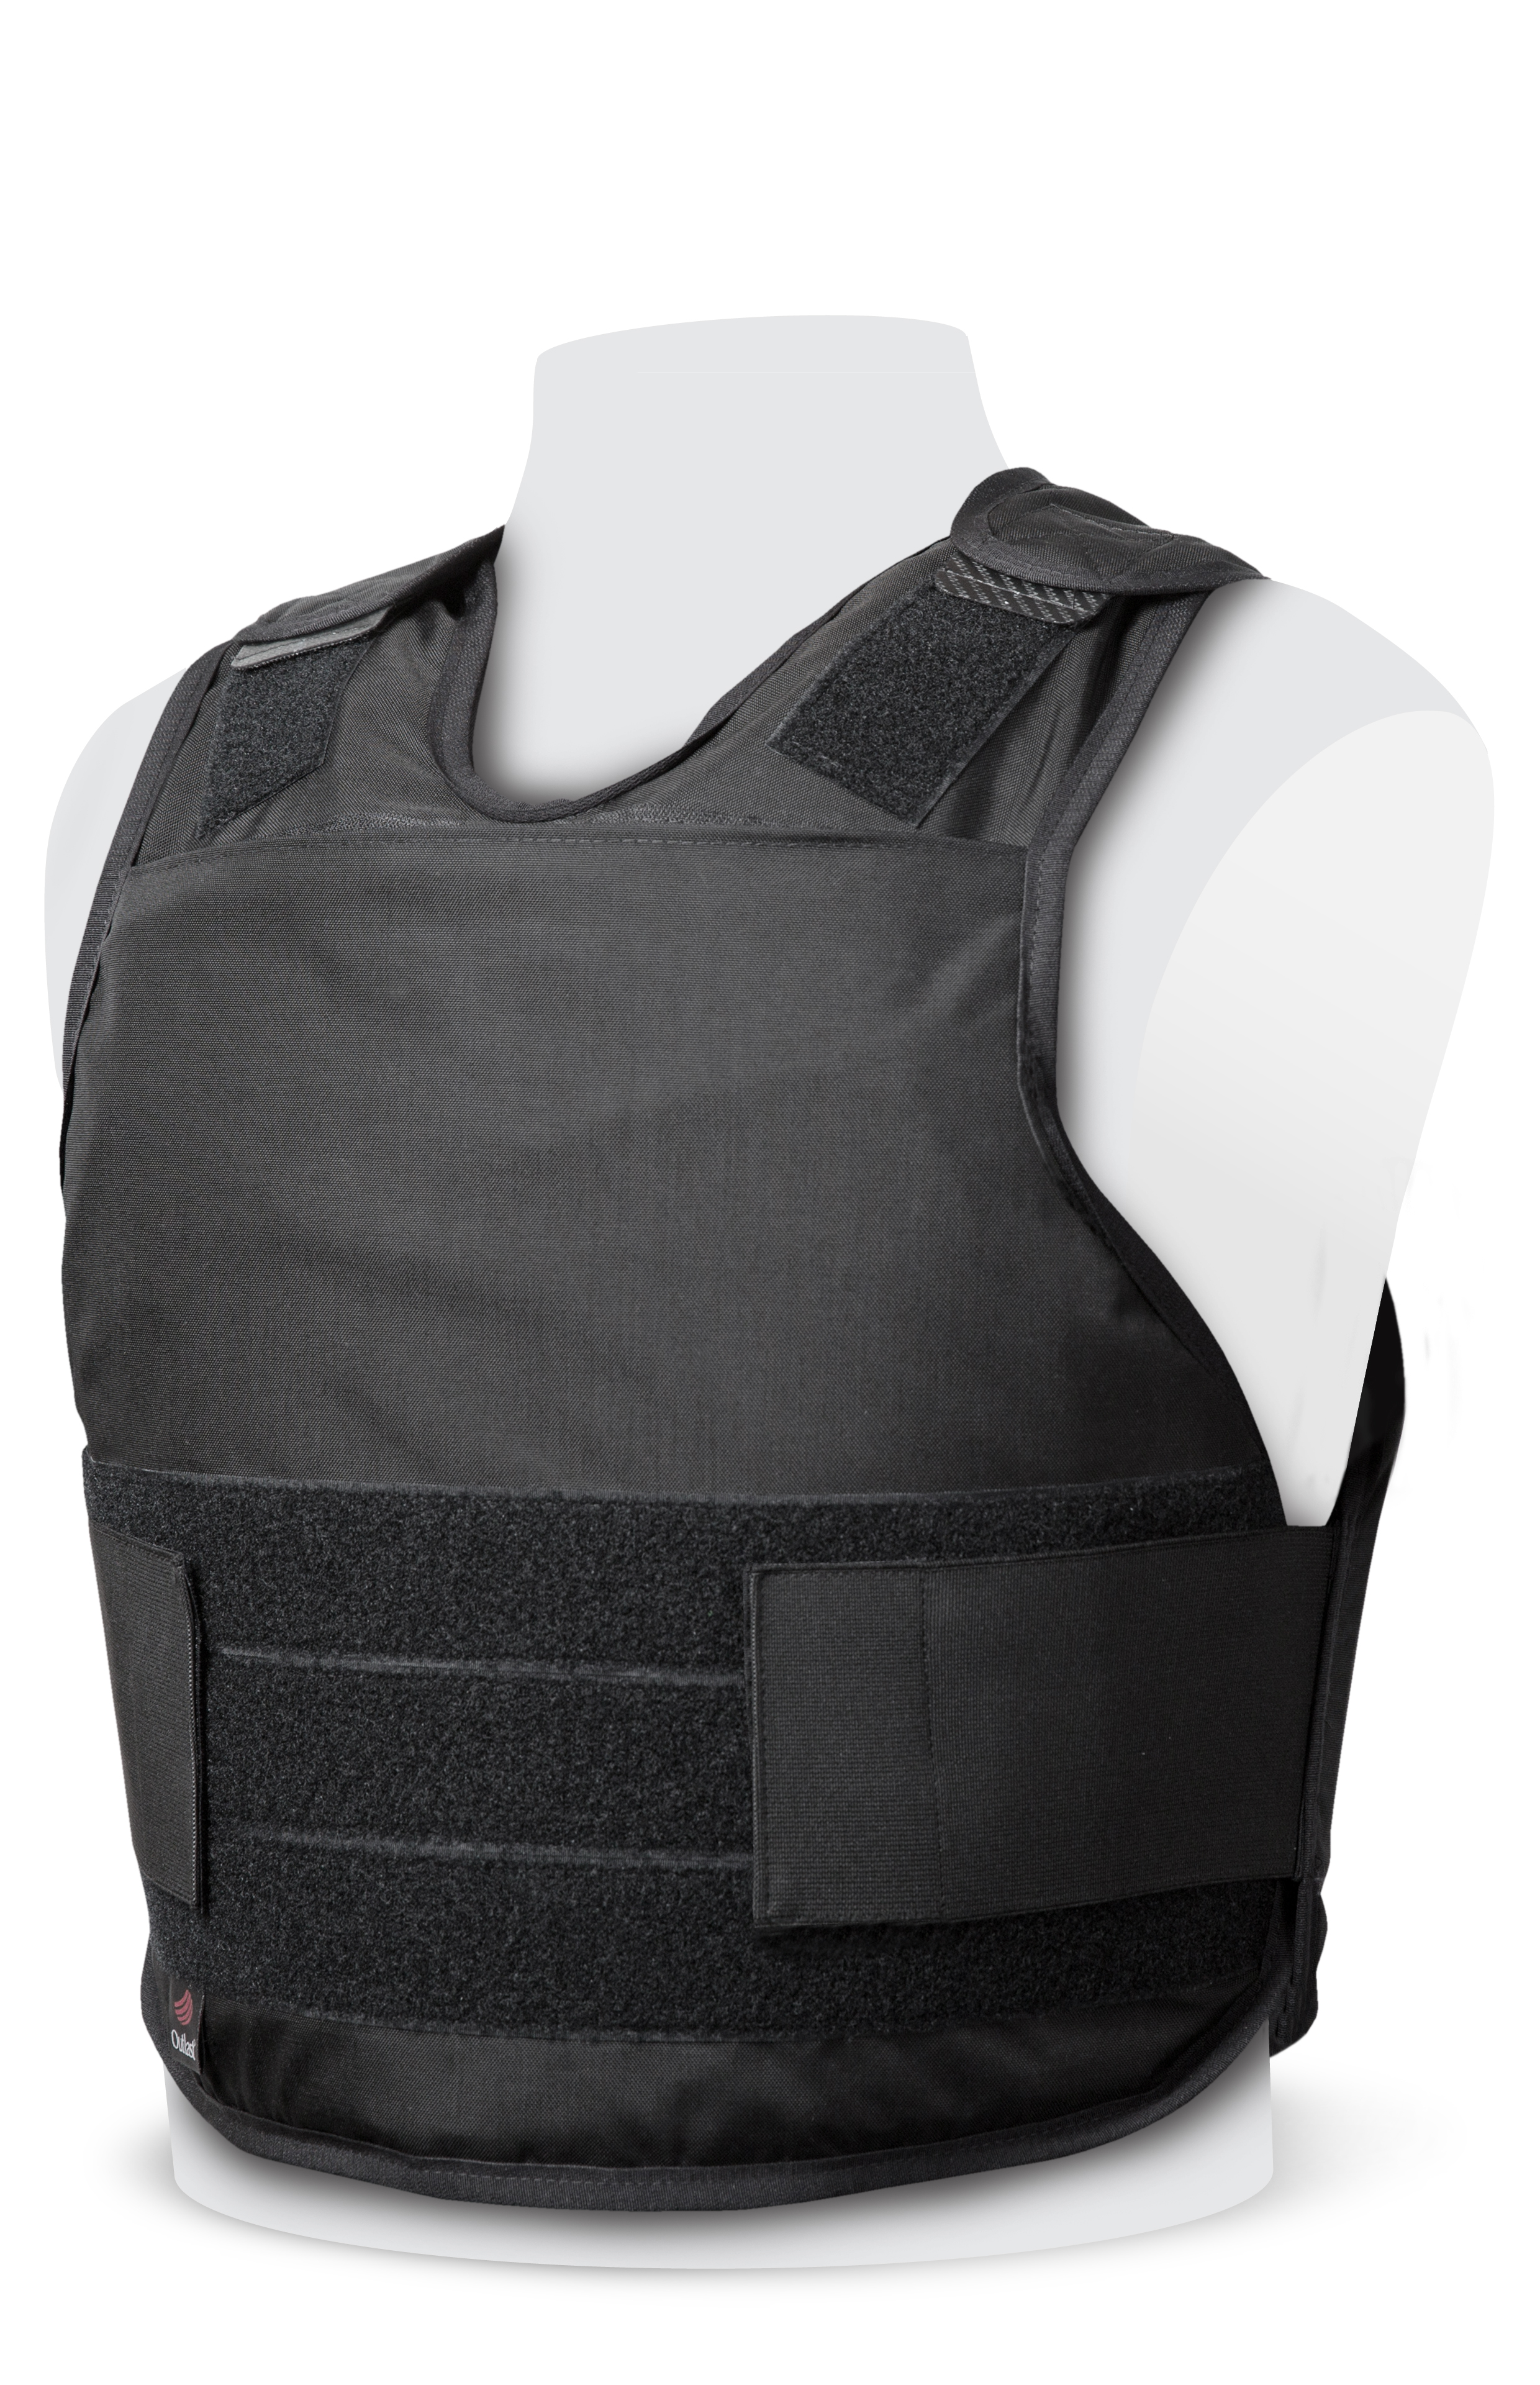 how heavy is a bullet proof vest